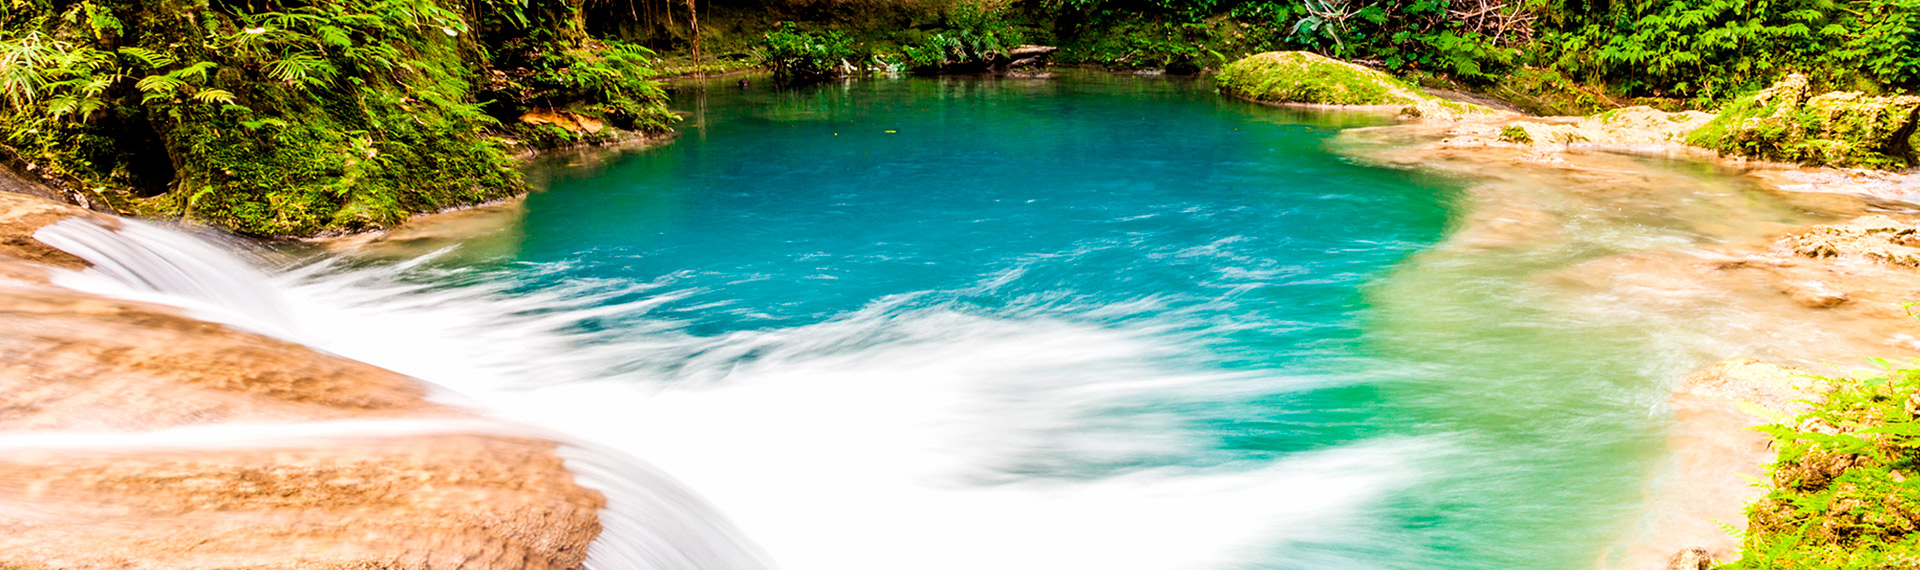 Natural pond of crystal water to enjoy in a well deserved vacation in Jamaica